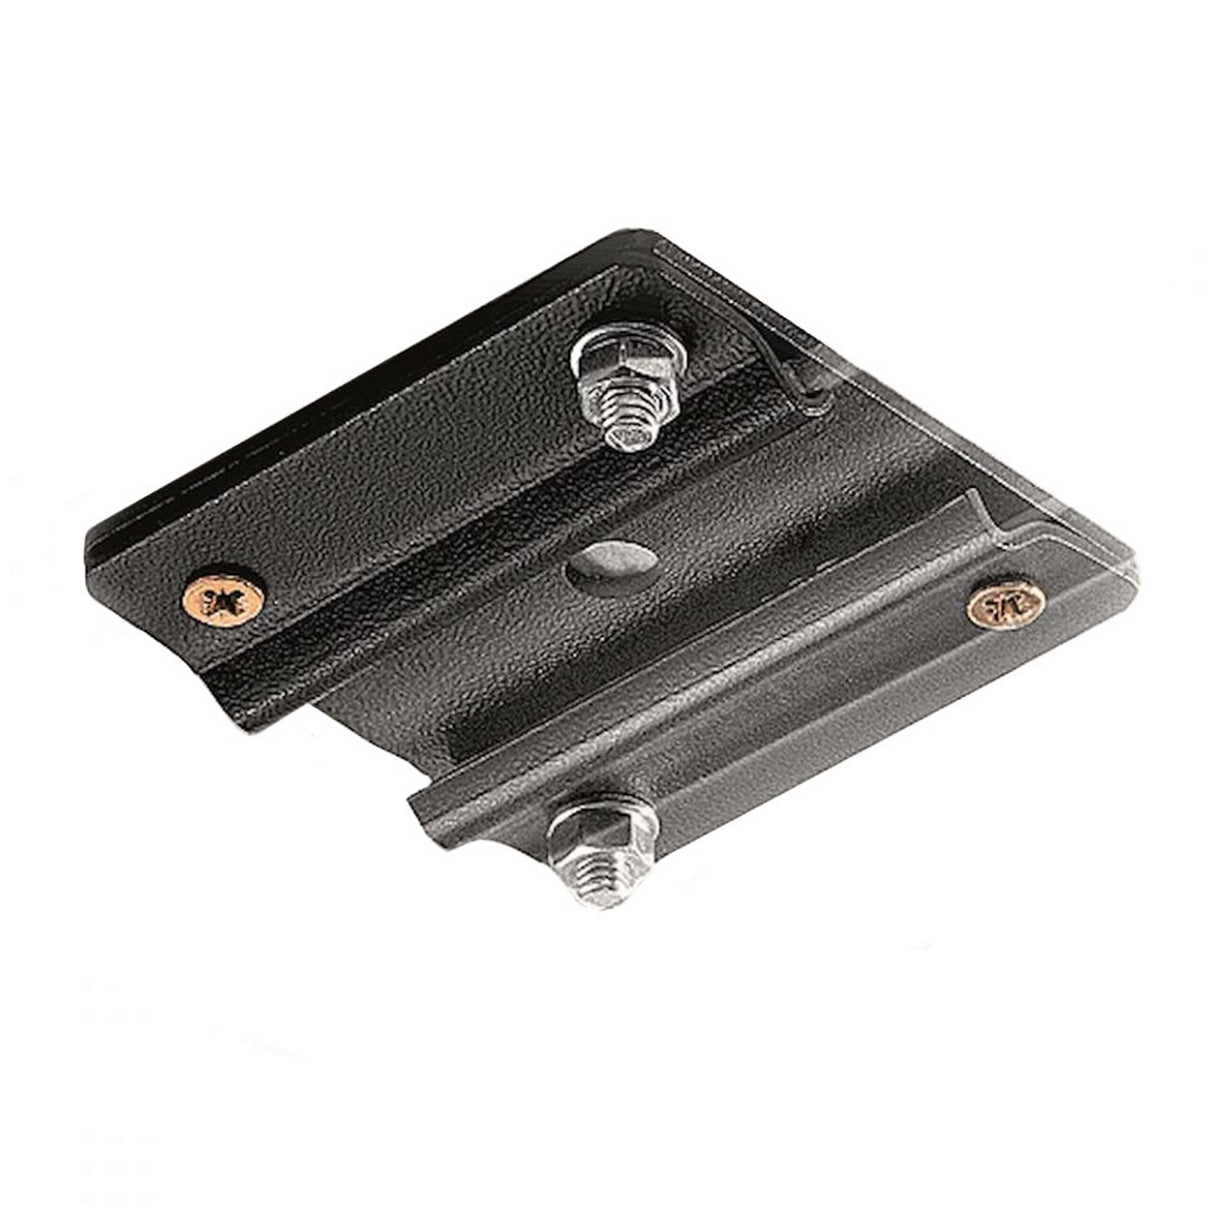 Manfrotto FF3210 Bracket for Rail to Ceiling